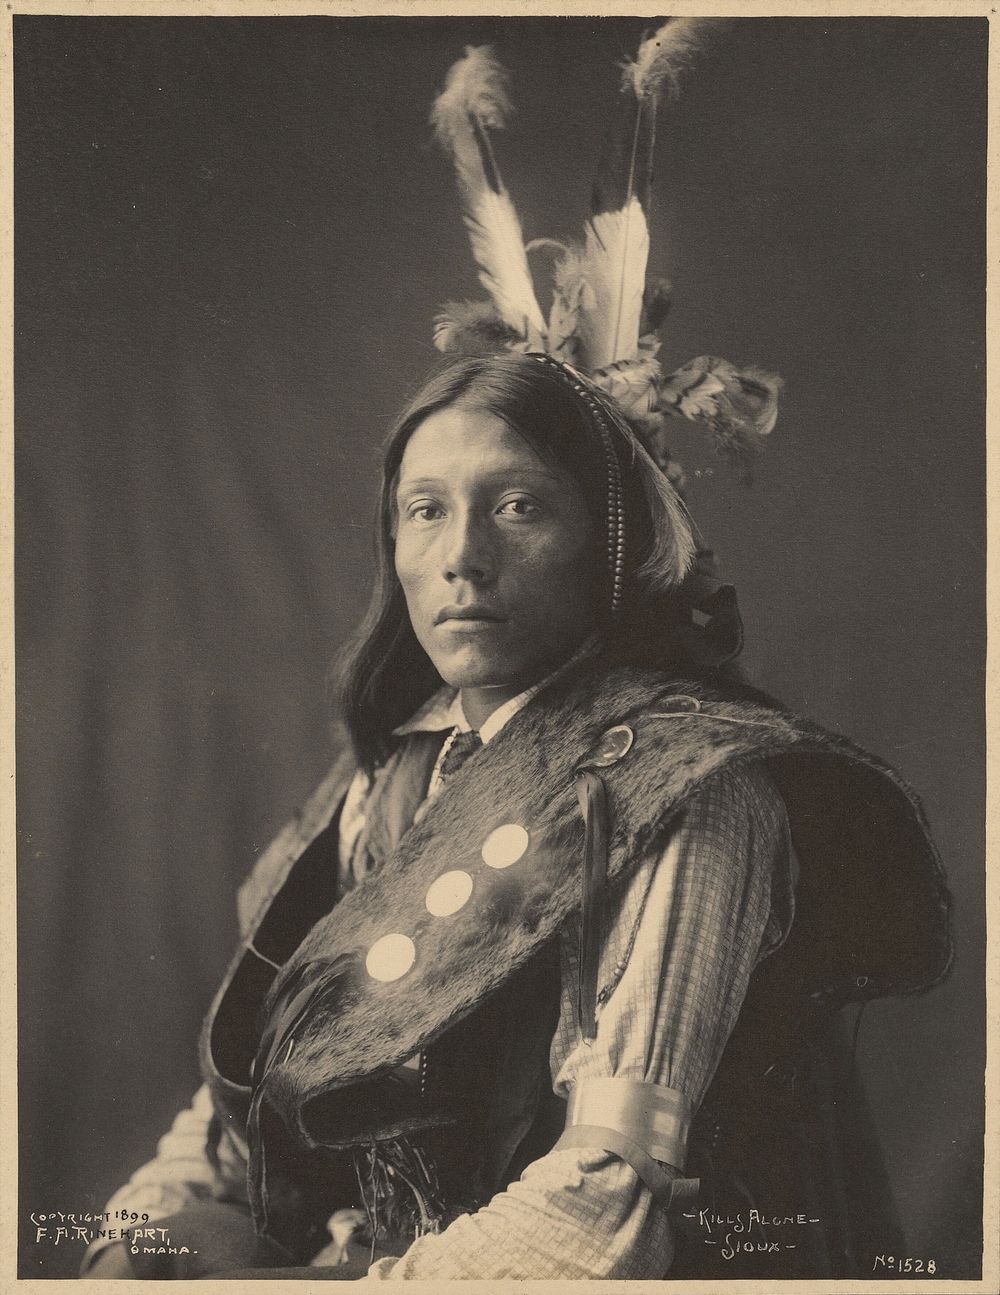 Kills Alone, Sioux by Adolph F Muhr and Frank A Rinehart